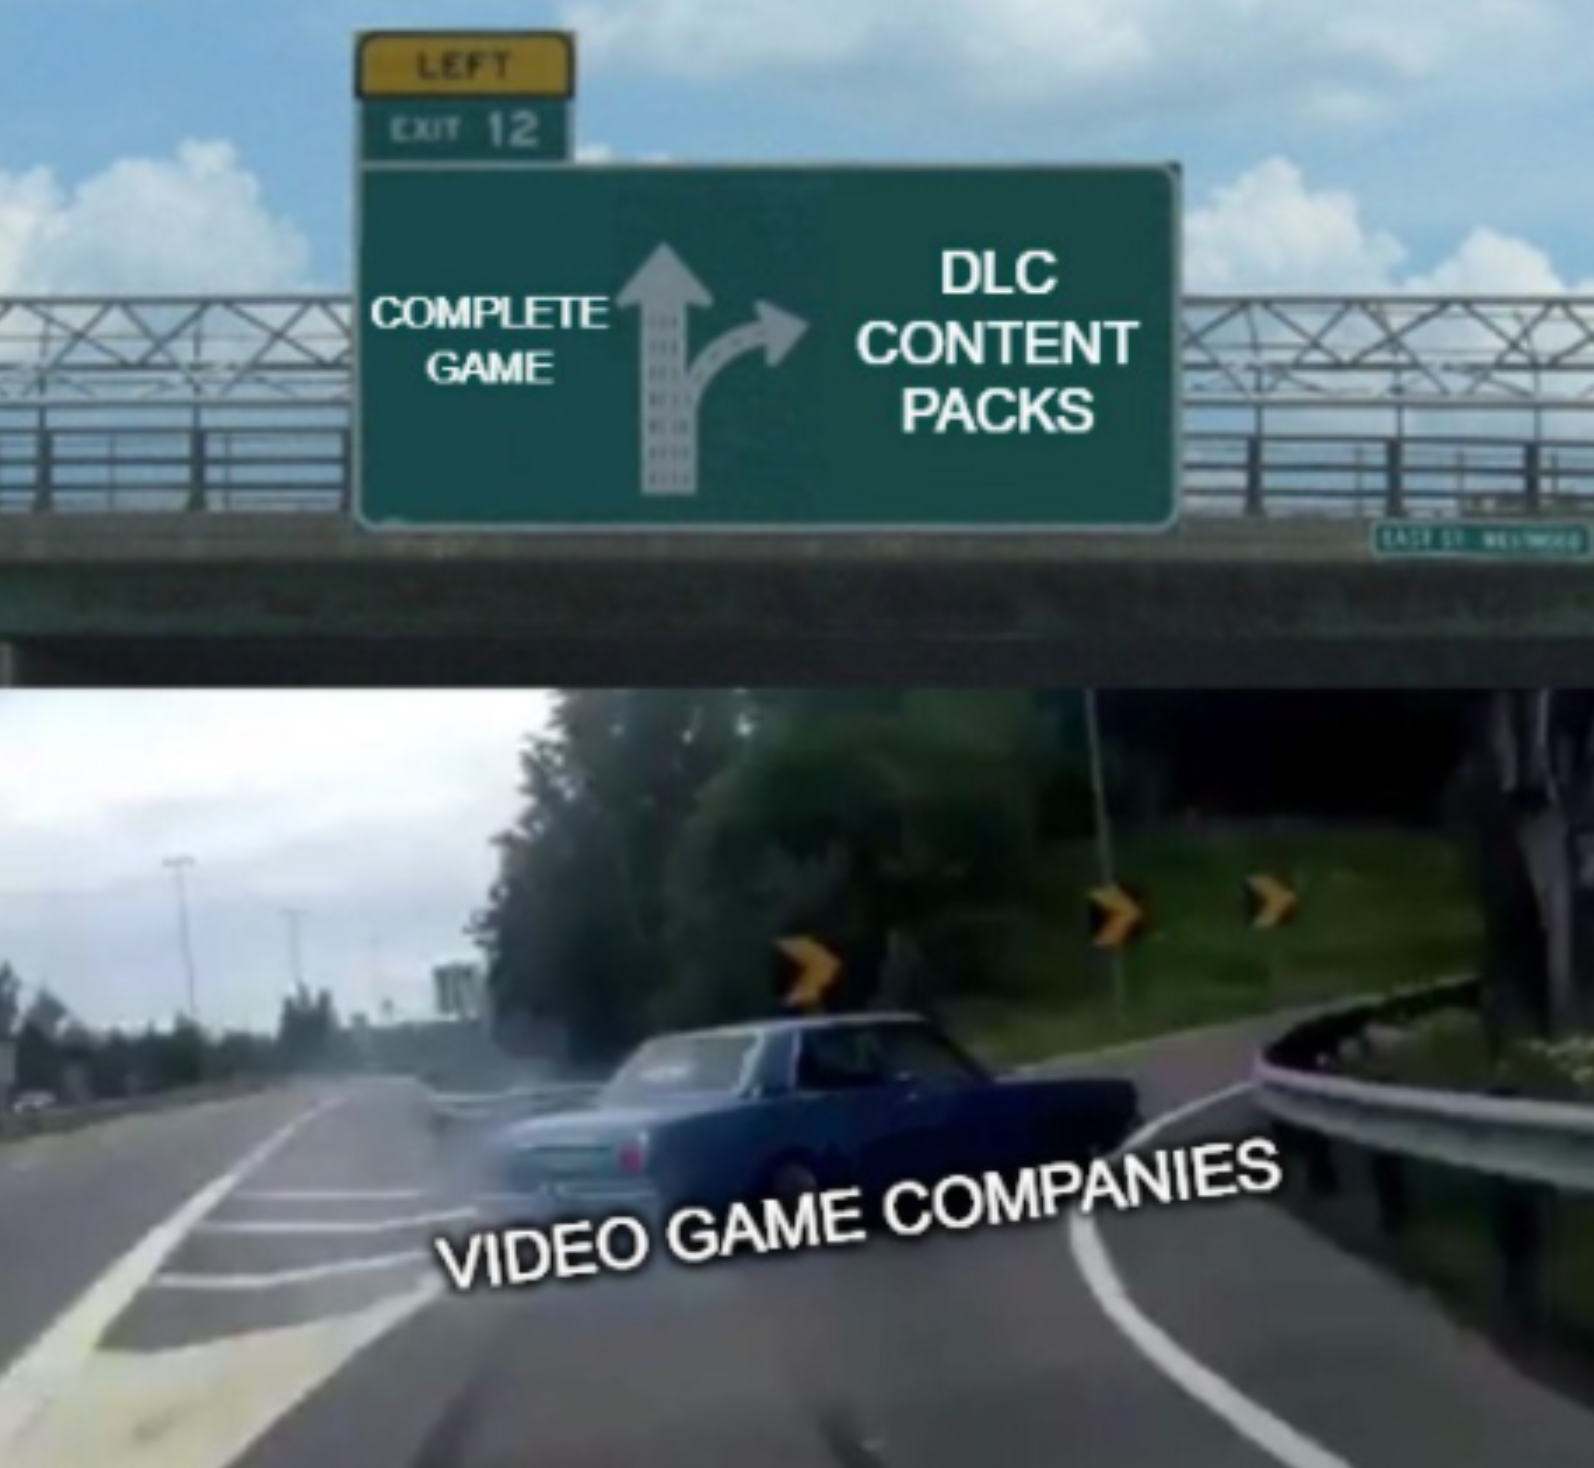 funny gaming memes - elemeno p meme - Left Cut 12 Complete Game r Dlc Content Packs Video Game Companies